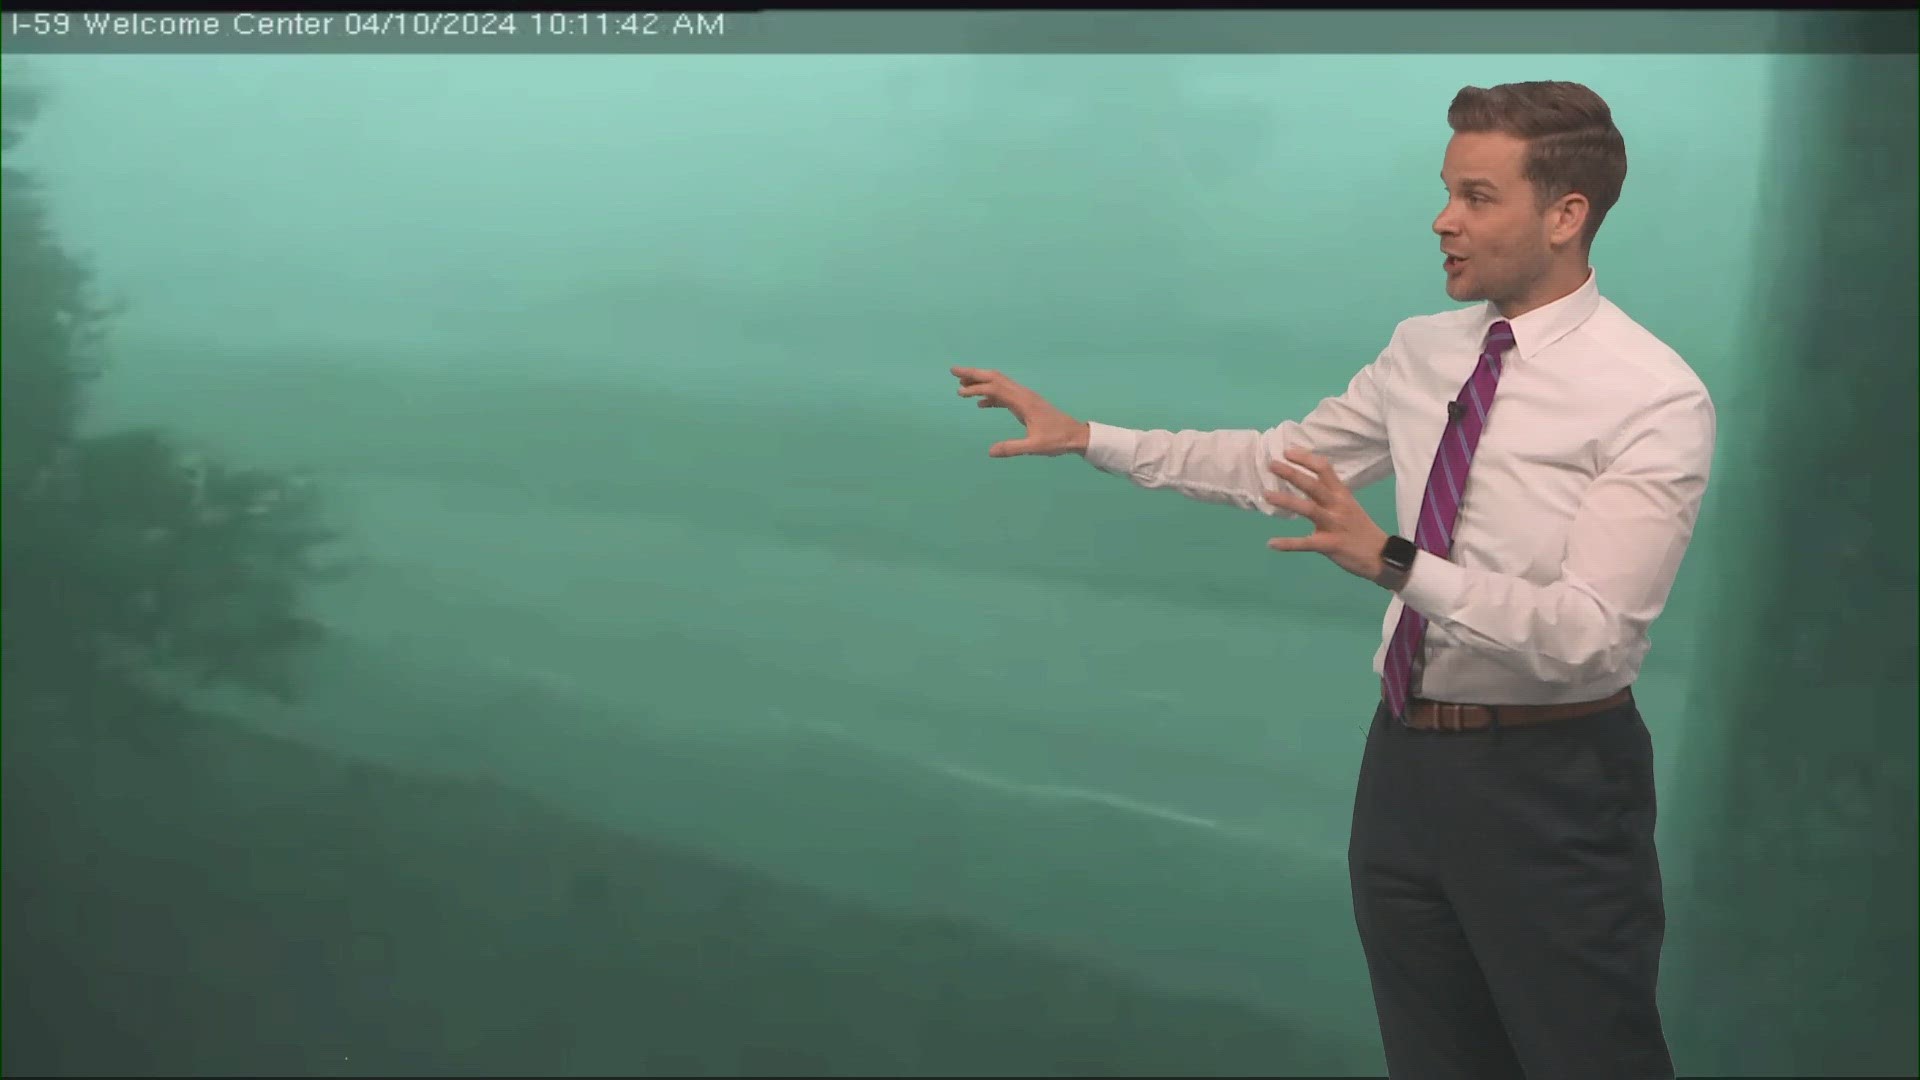 Payton Malone talks about very strong winds visible on a traffic camera. Winds of up to 80 mph are forecast.